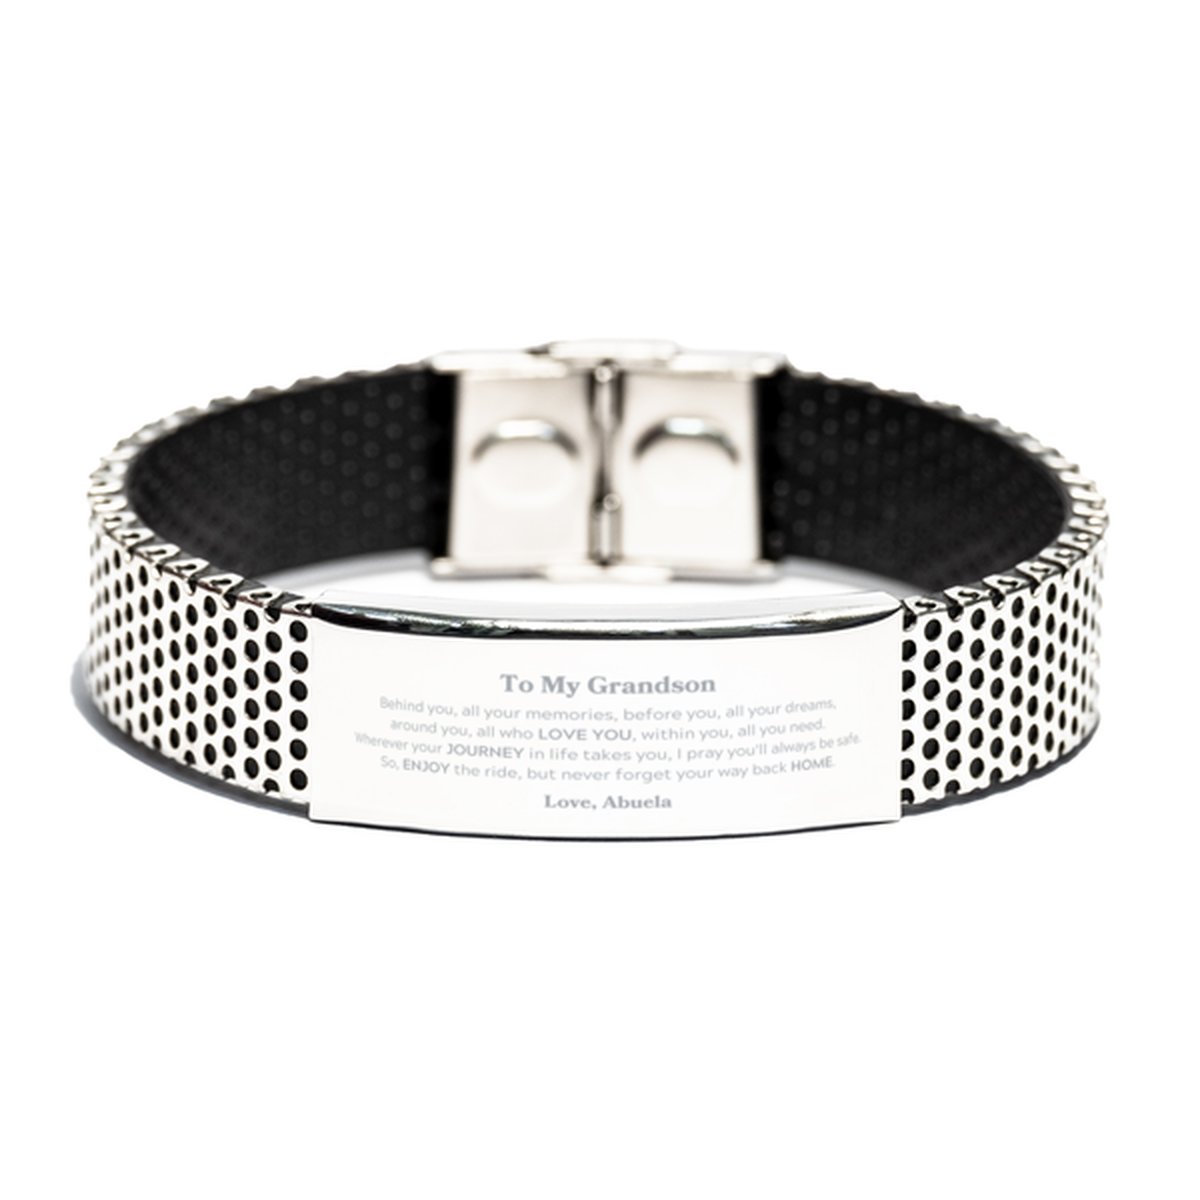 To My Grandson Graduation Gifts from Abuela, Grandson Stainless Steel Bracelet Christmas Birthday Gifts for Grandson Behind you, all your memories, before you, all your dreams. Love, Abuela